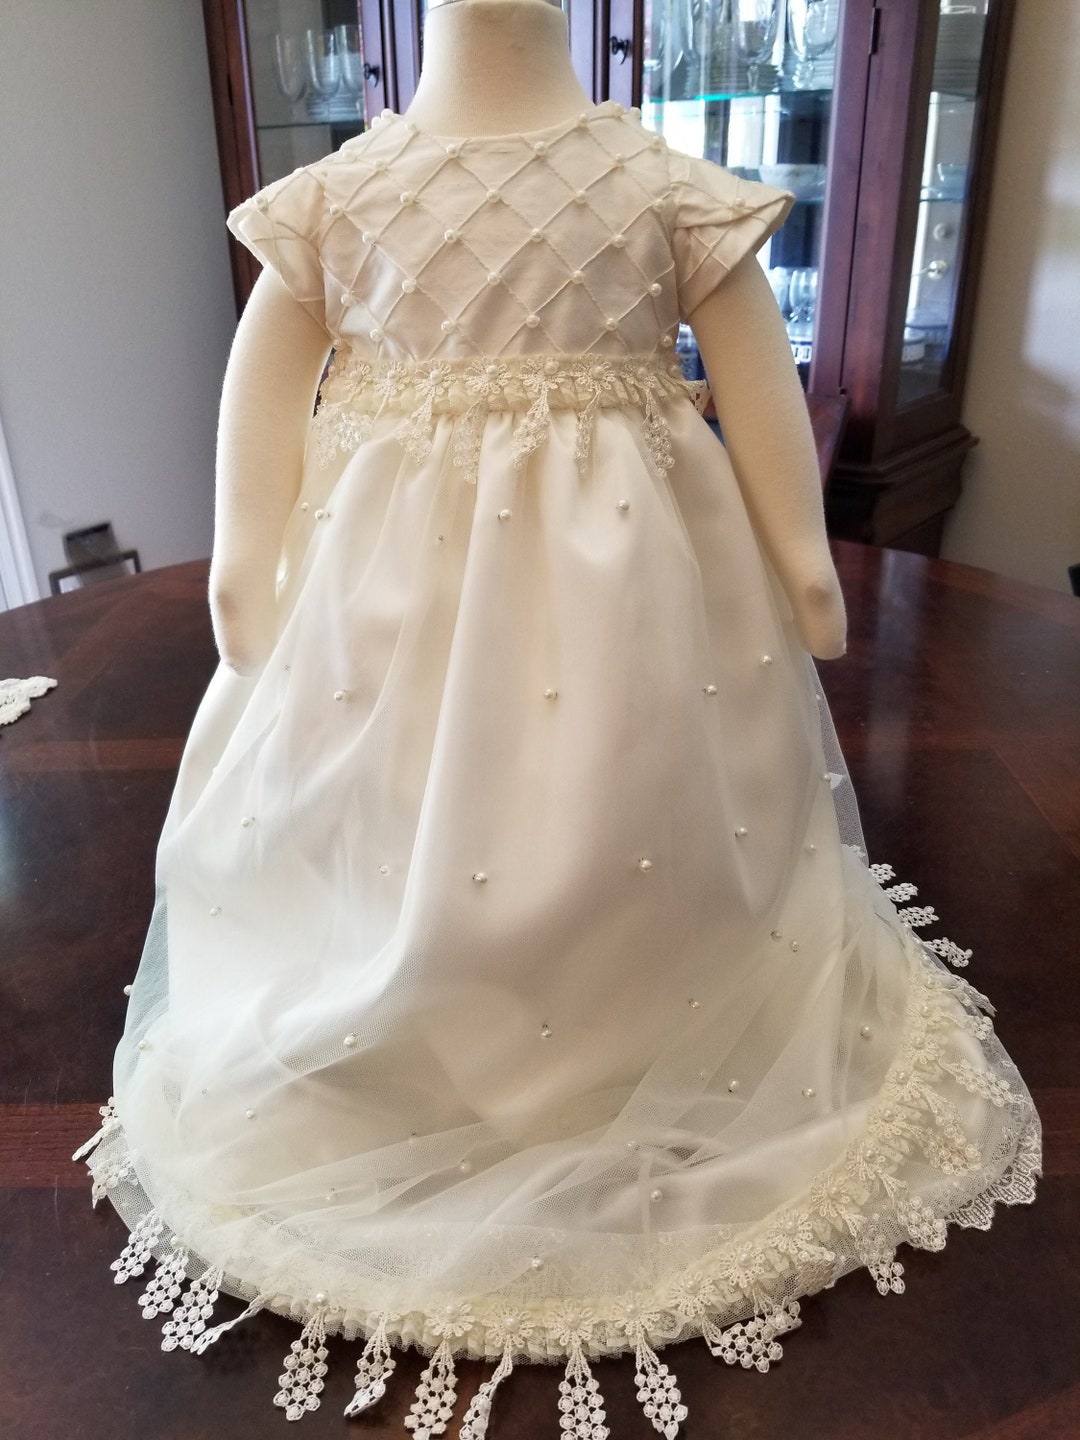 Silk, Satin and Tulle With Pearls Christening/baptism/blessing Gown ...